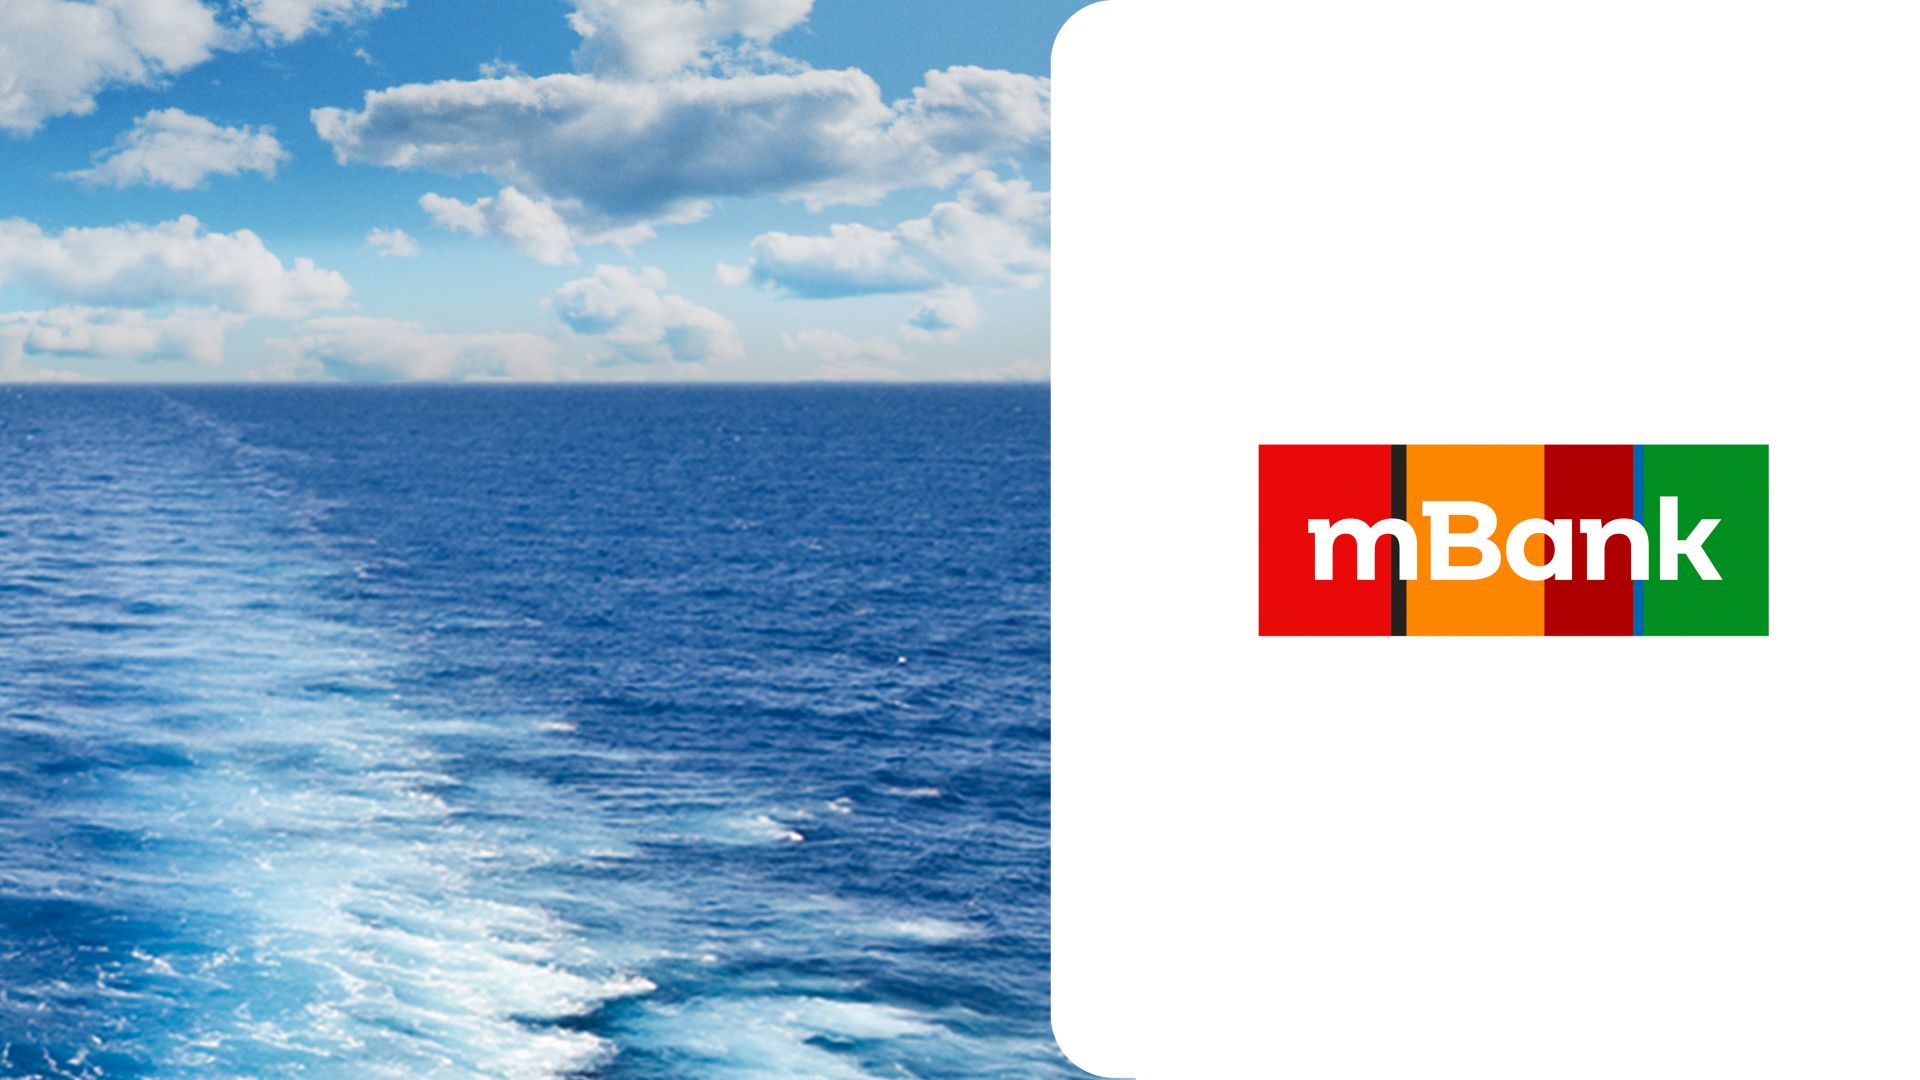 Special offers for mBank members